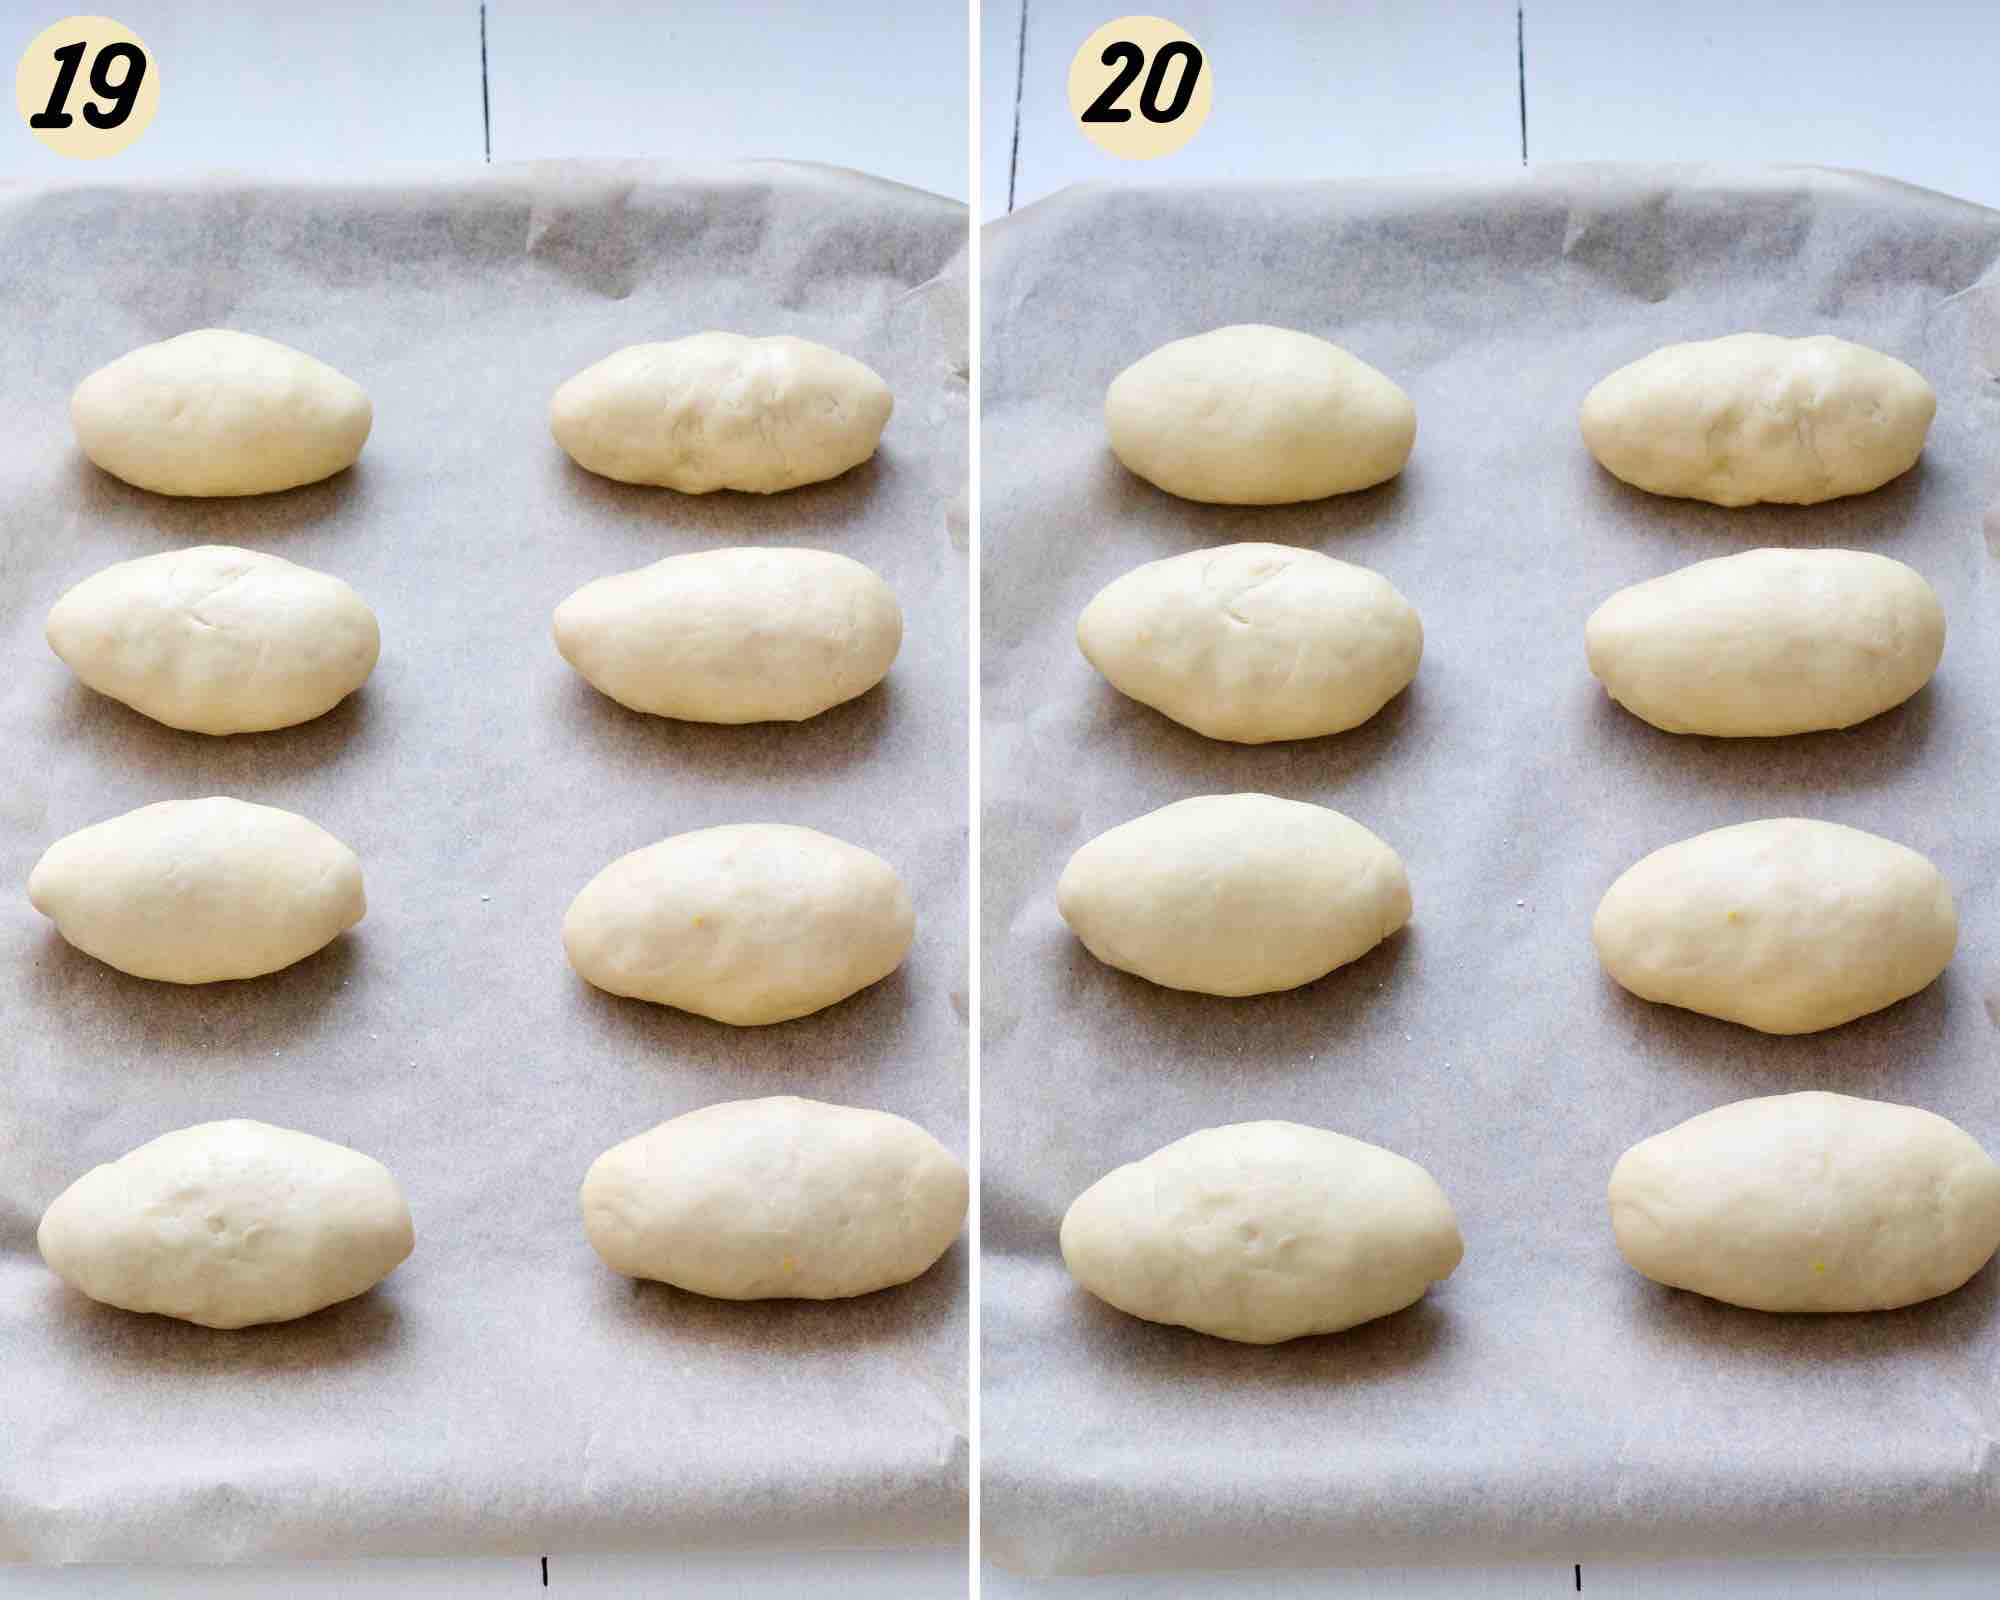 Shaped buns before and after resting.